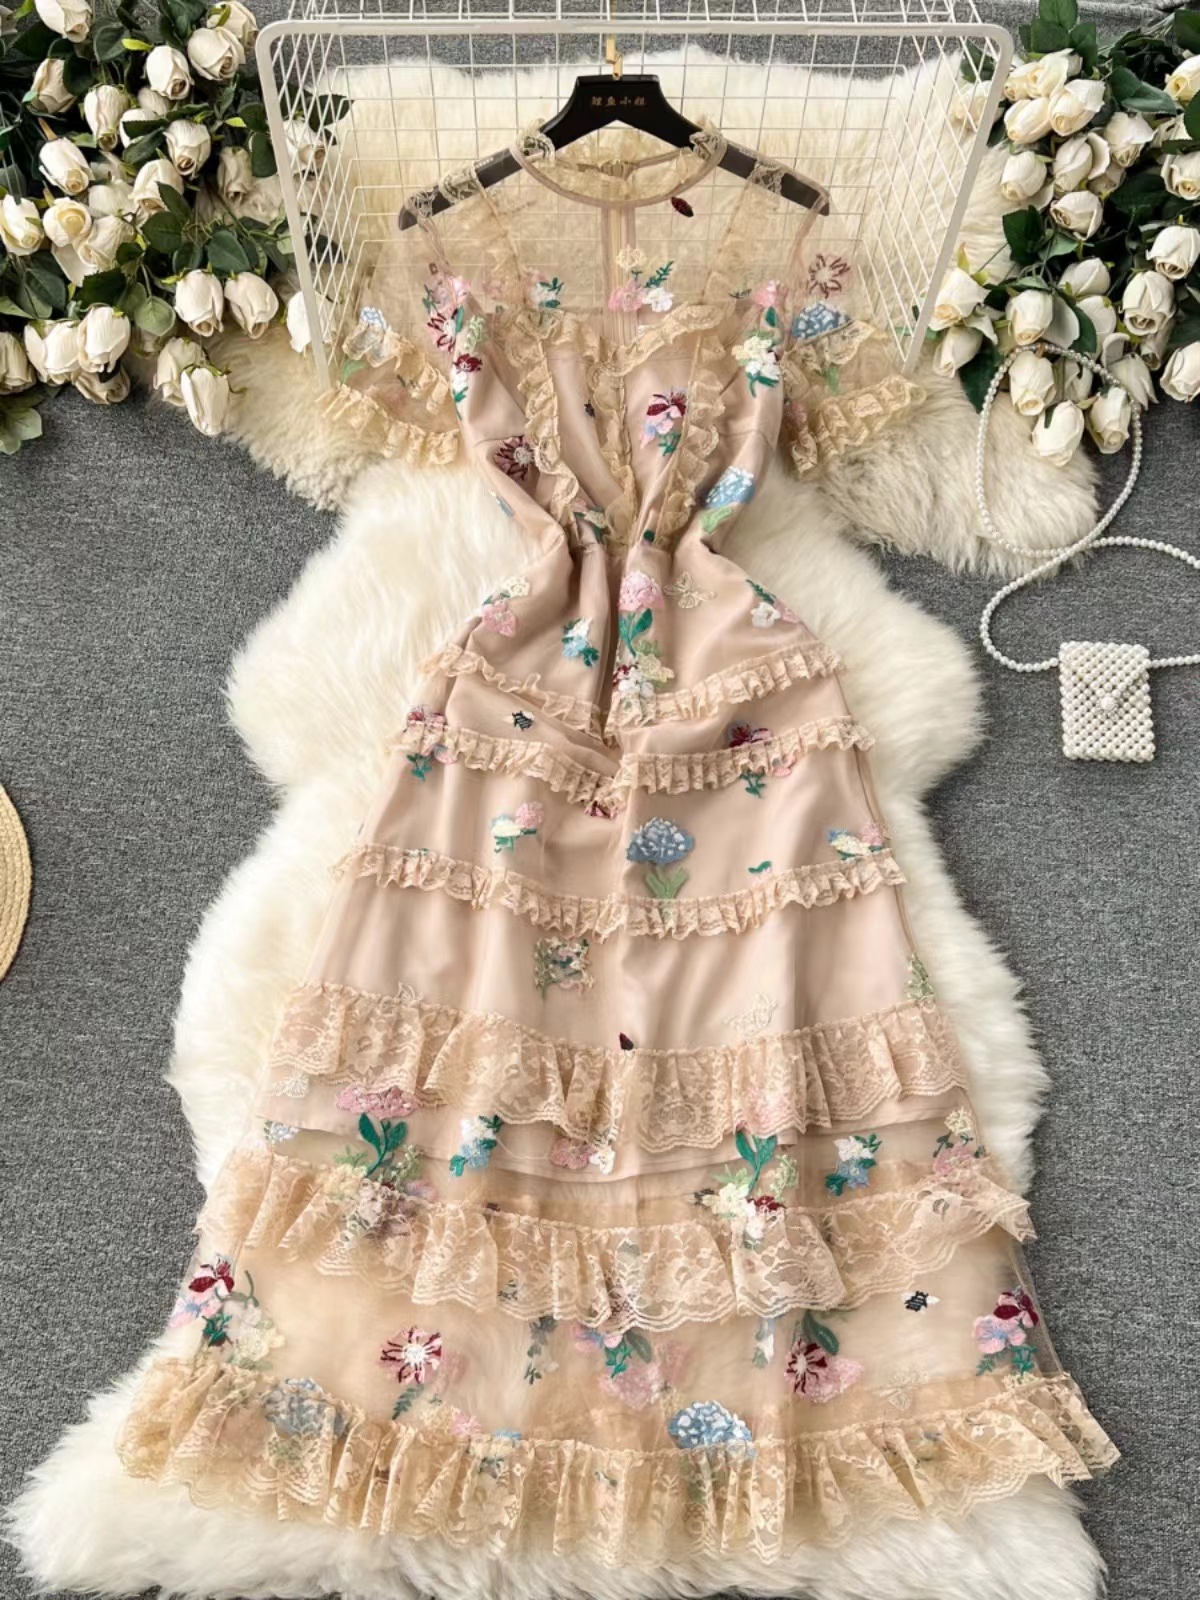 Vintage Dress Female Sweet Lace Lace Trim Midlength Embroidered Mesh Fairy Dress